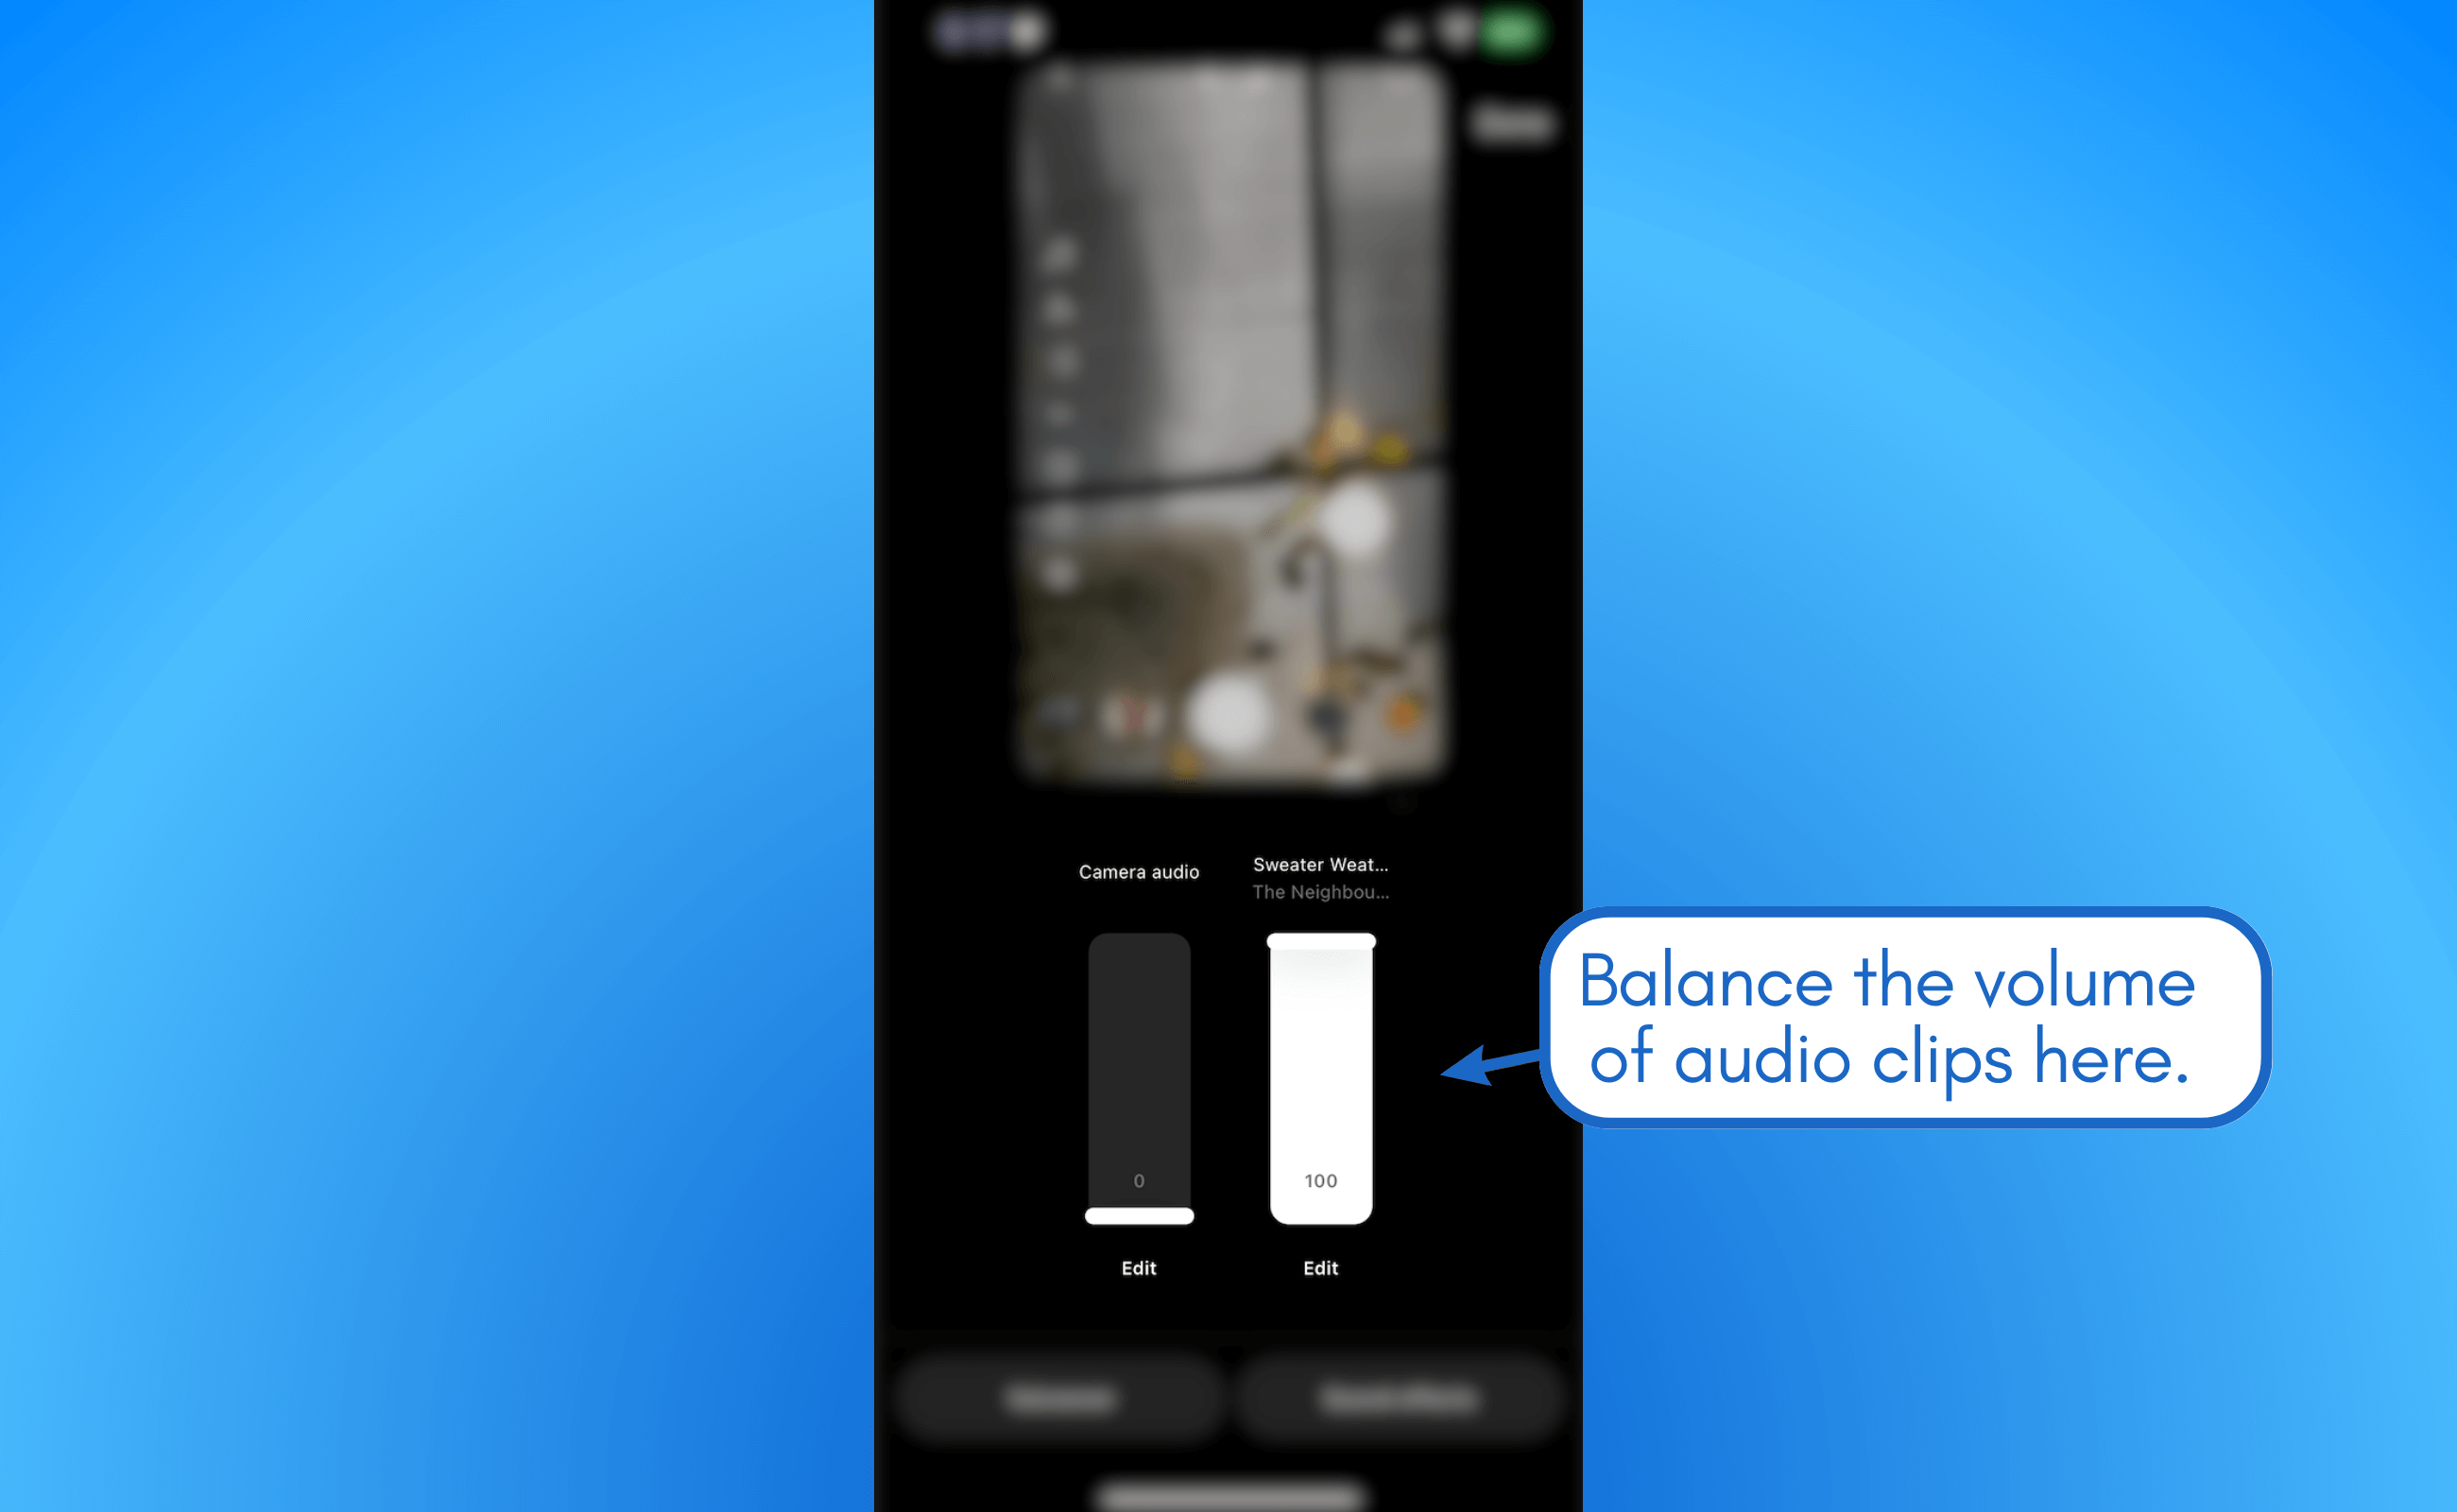 Balance the volume of the audio clips.